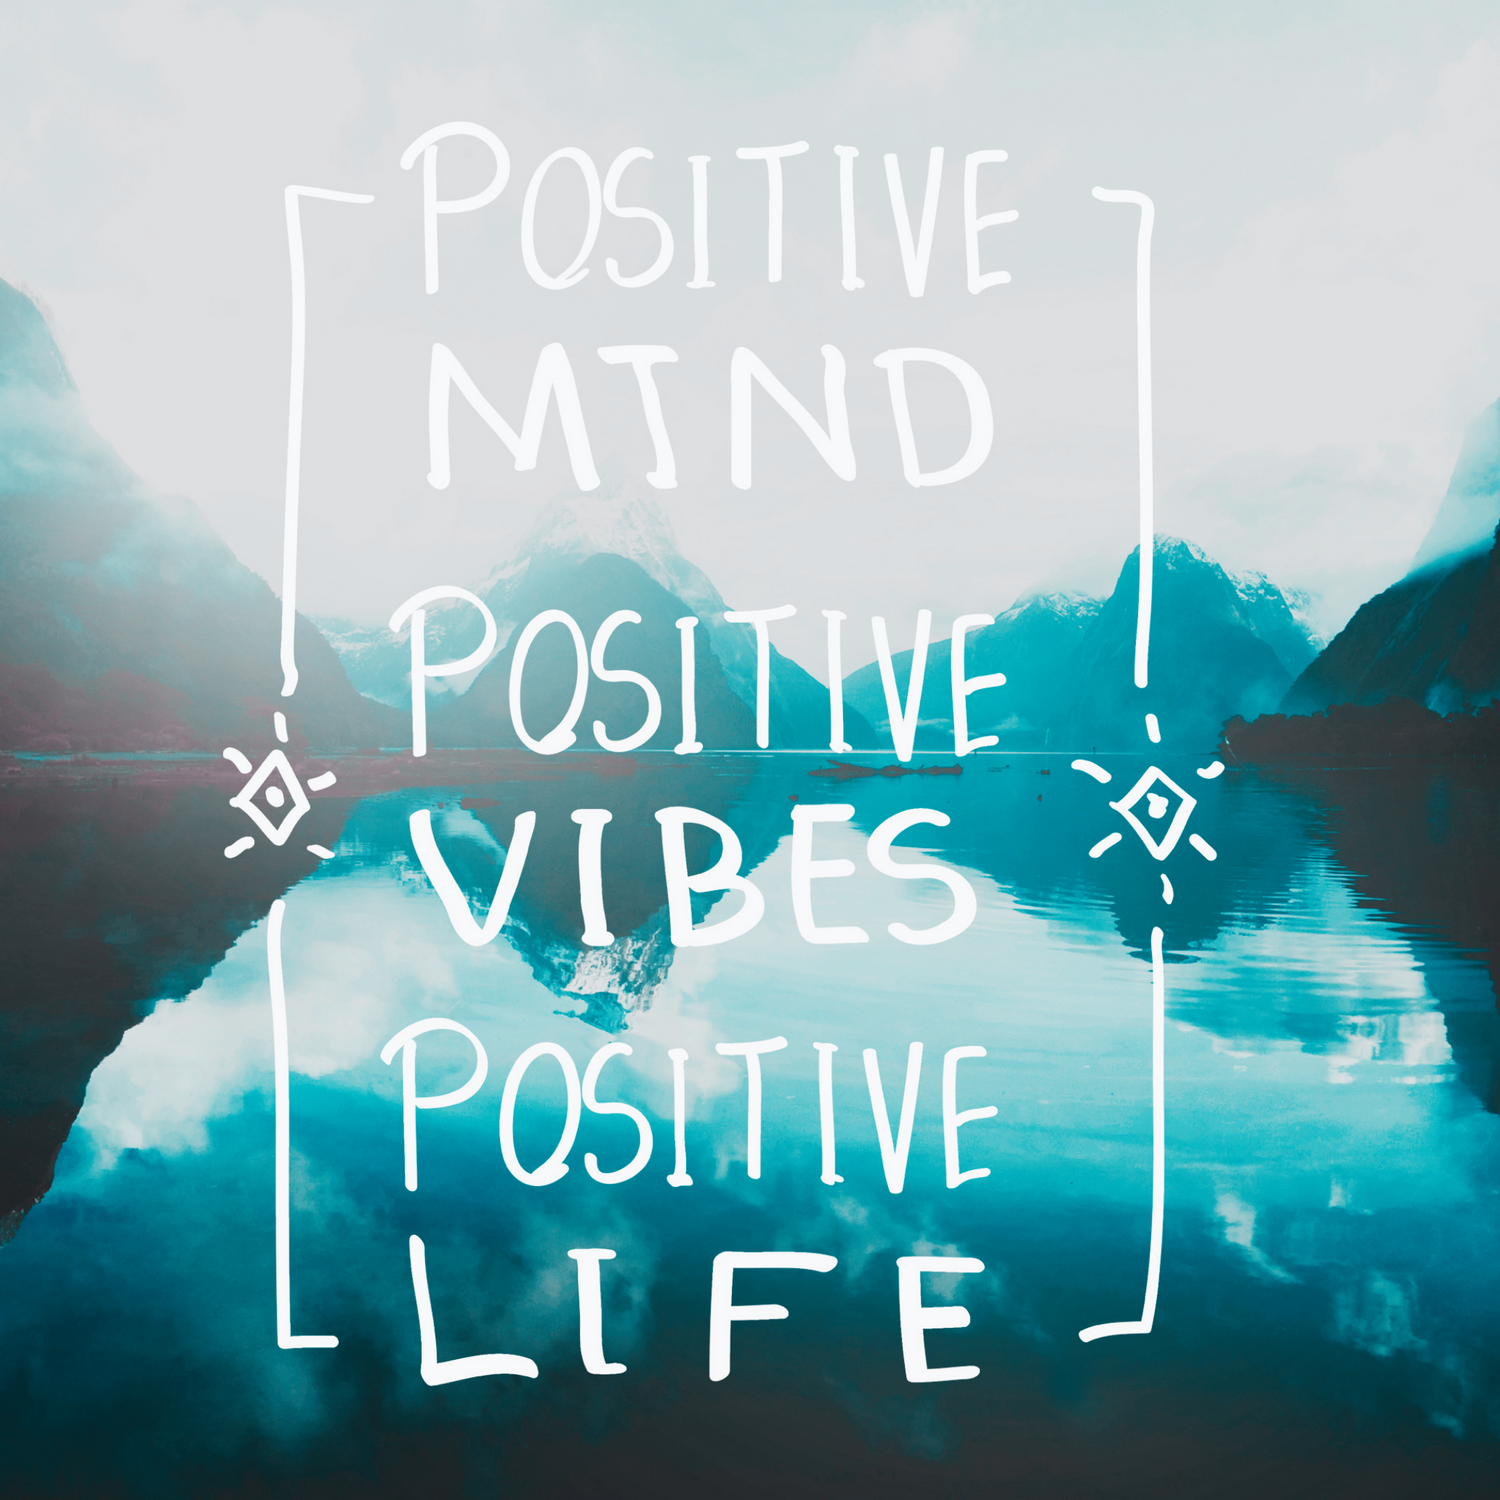 Picture of mountains and a lake, with a blue filter. The words "Positive Mind, Positive Vibes, Positive Life" are shown overlaid on the picture